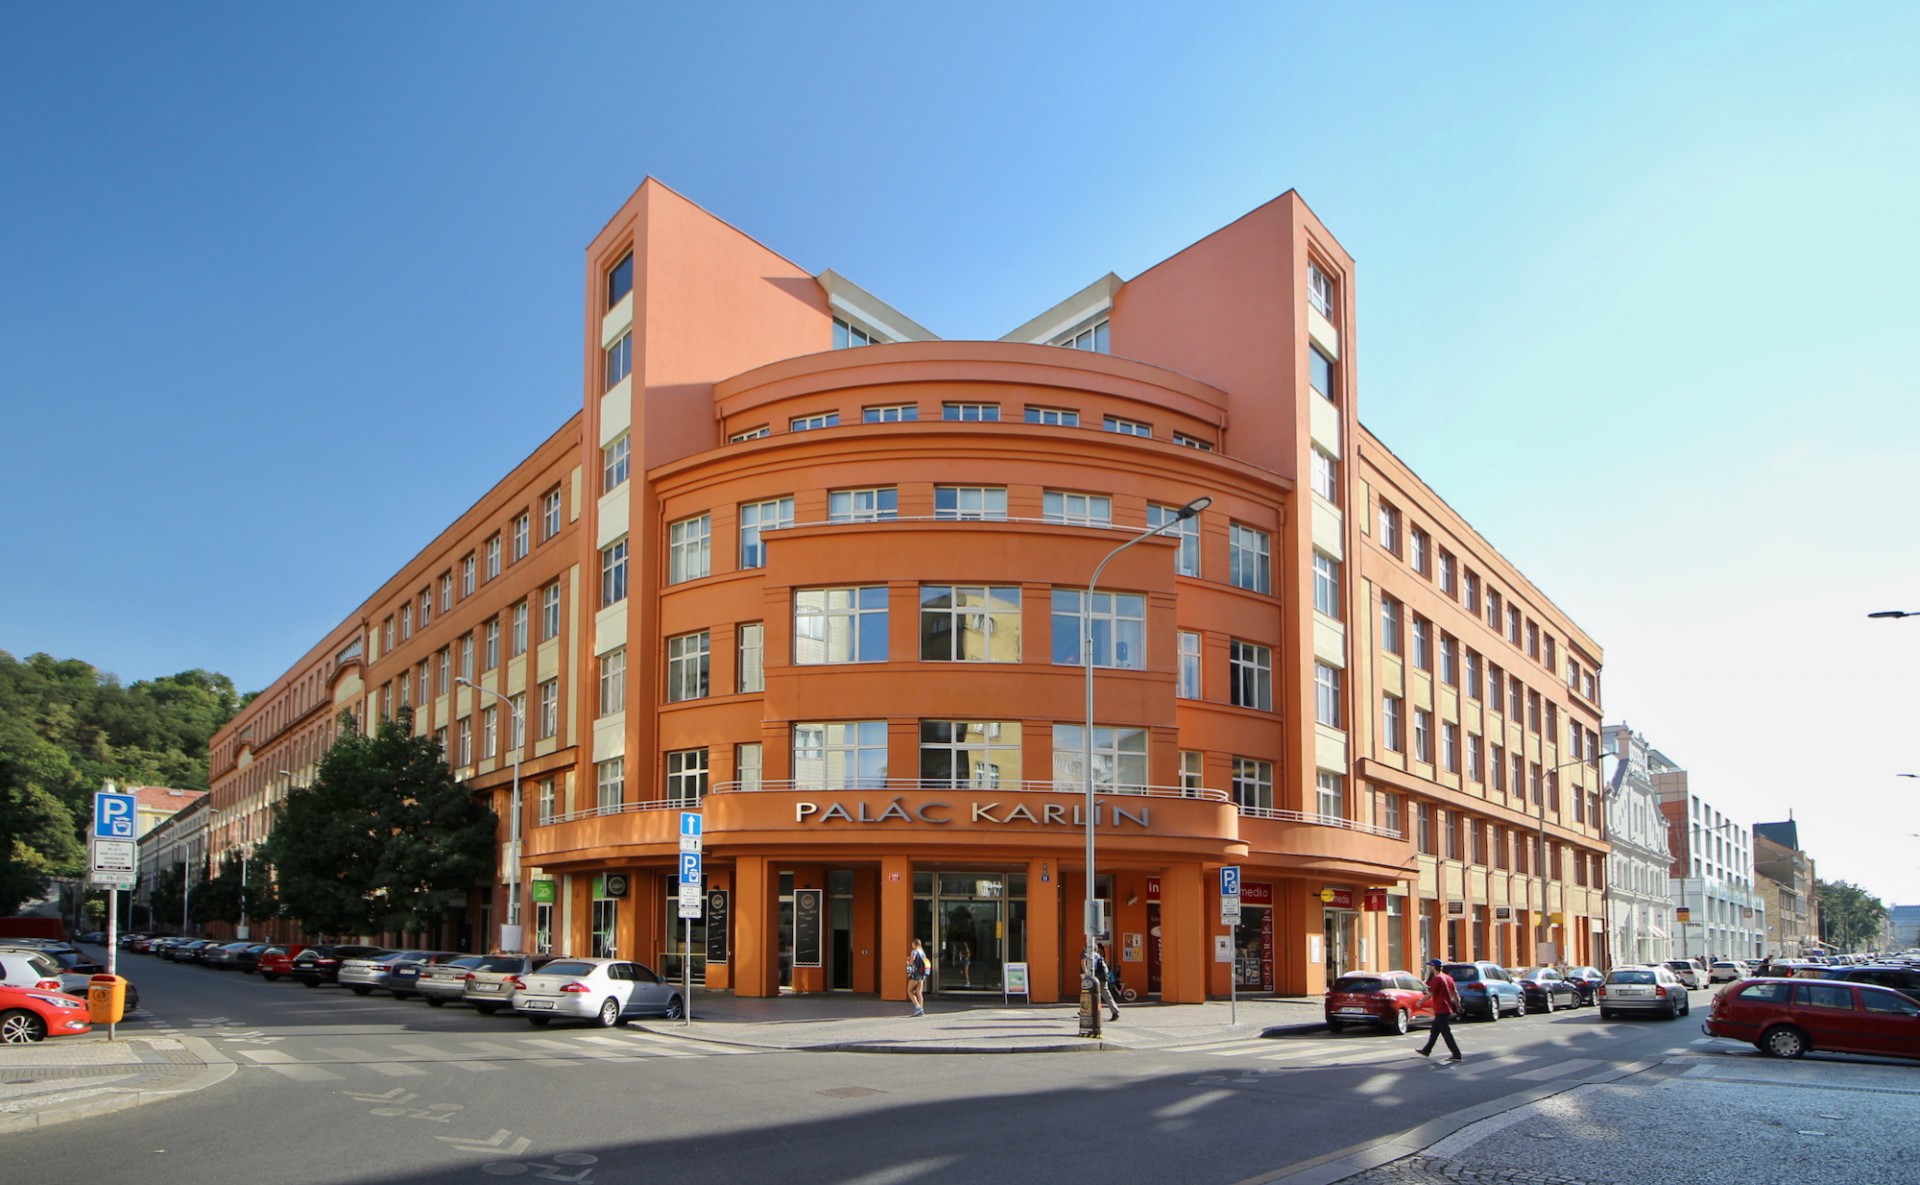 Offices in Karlín for rent